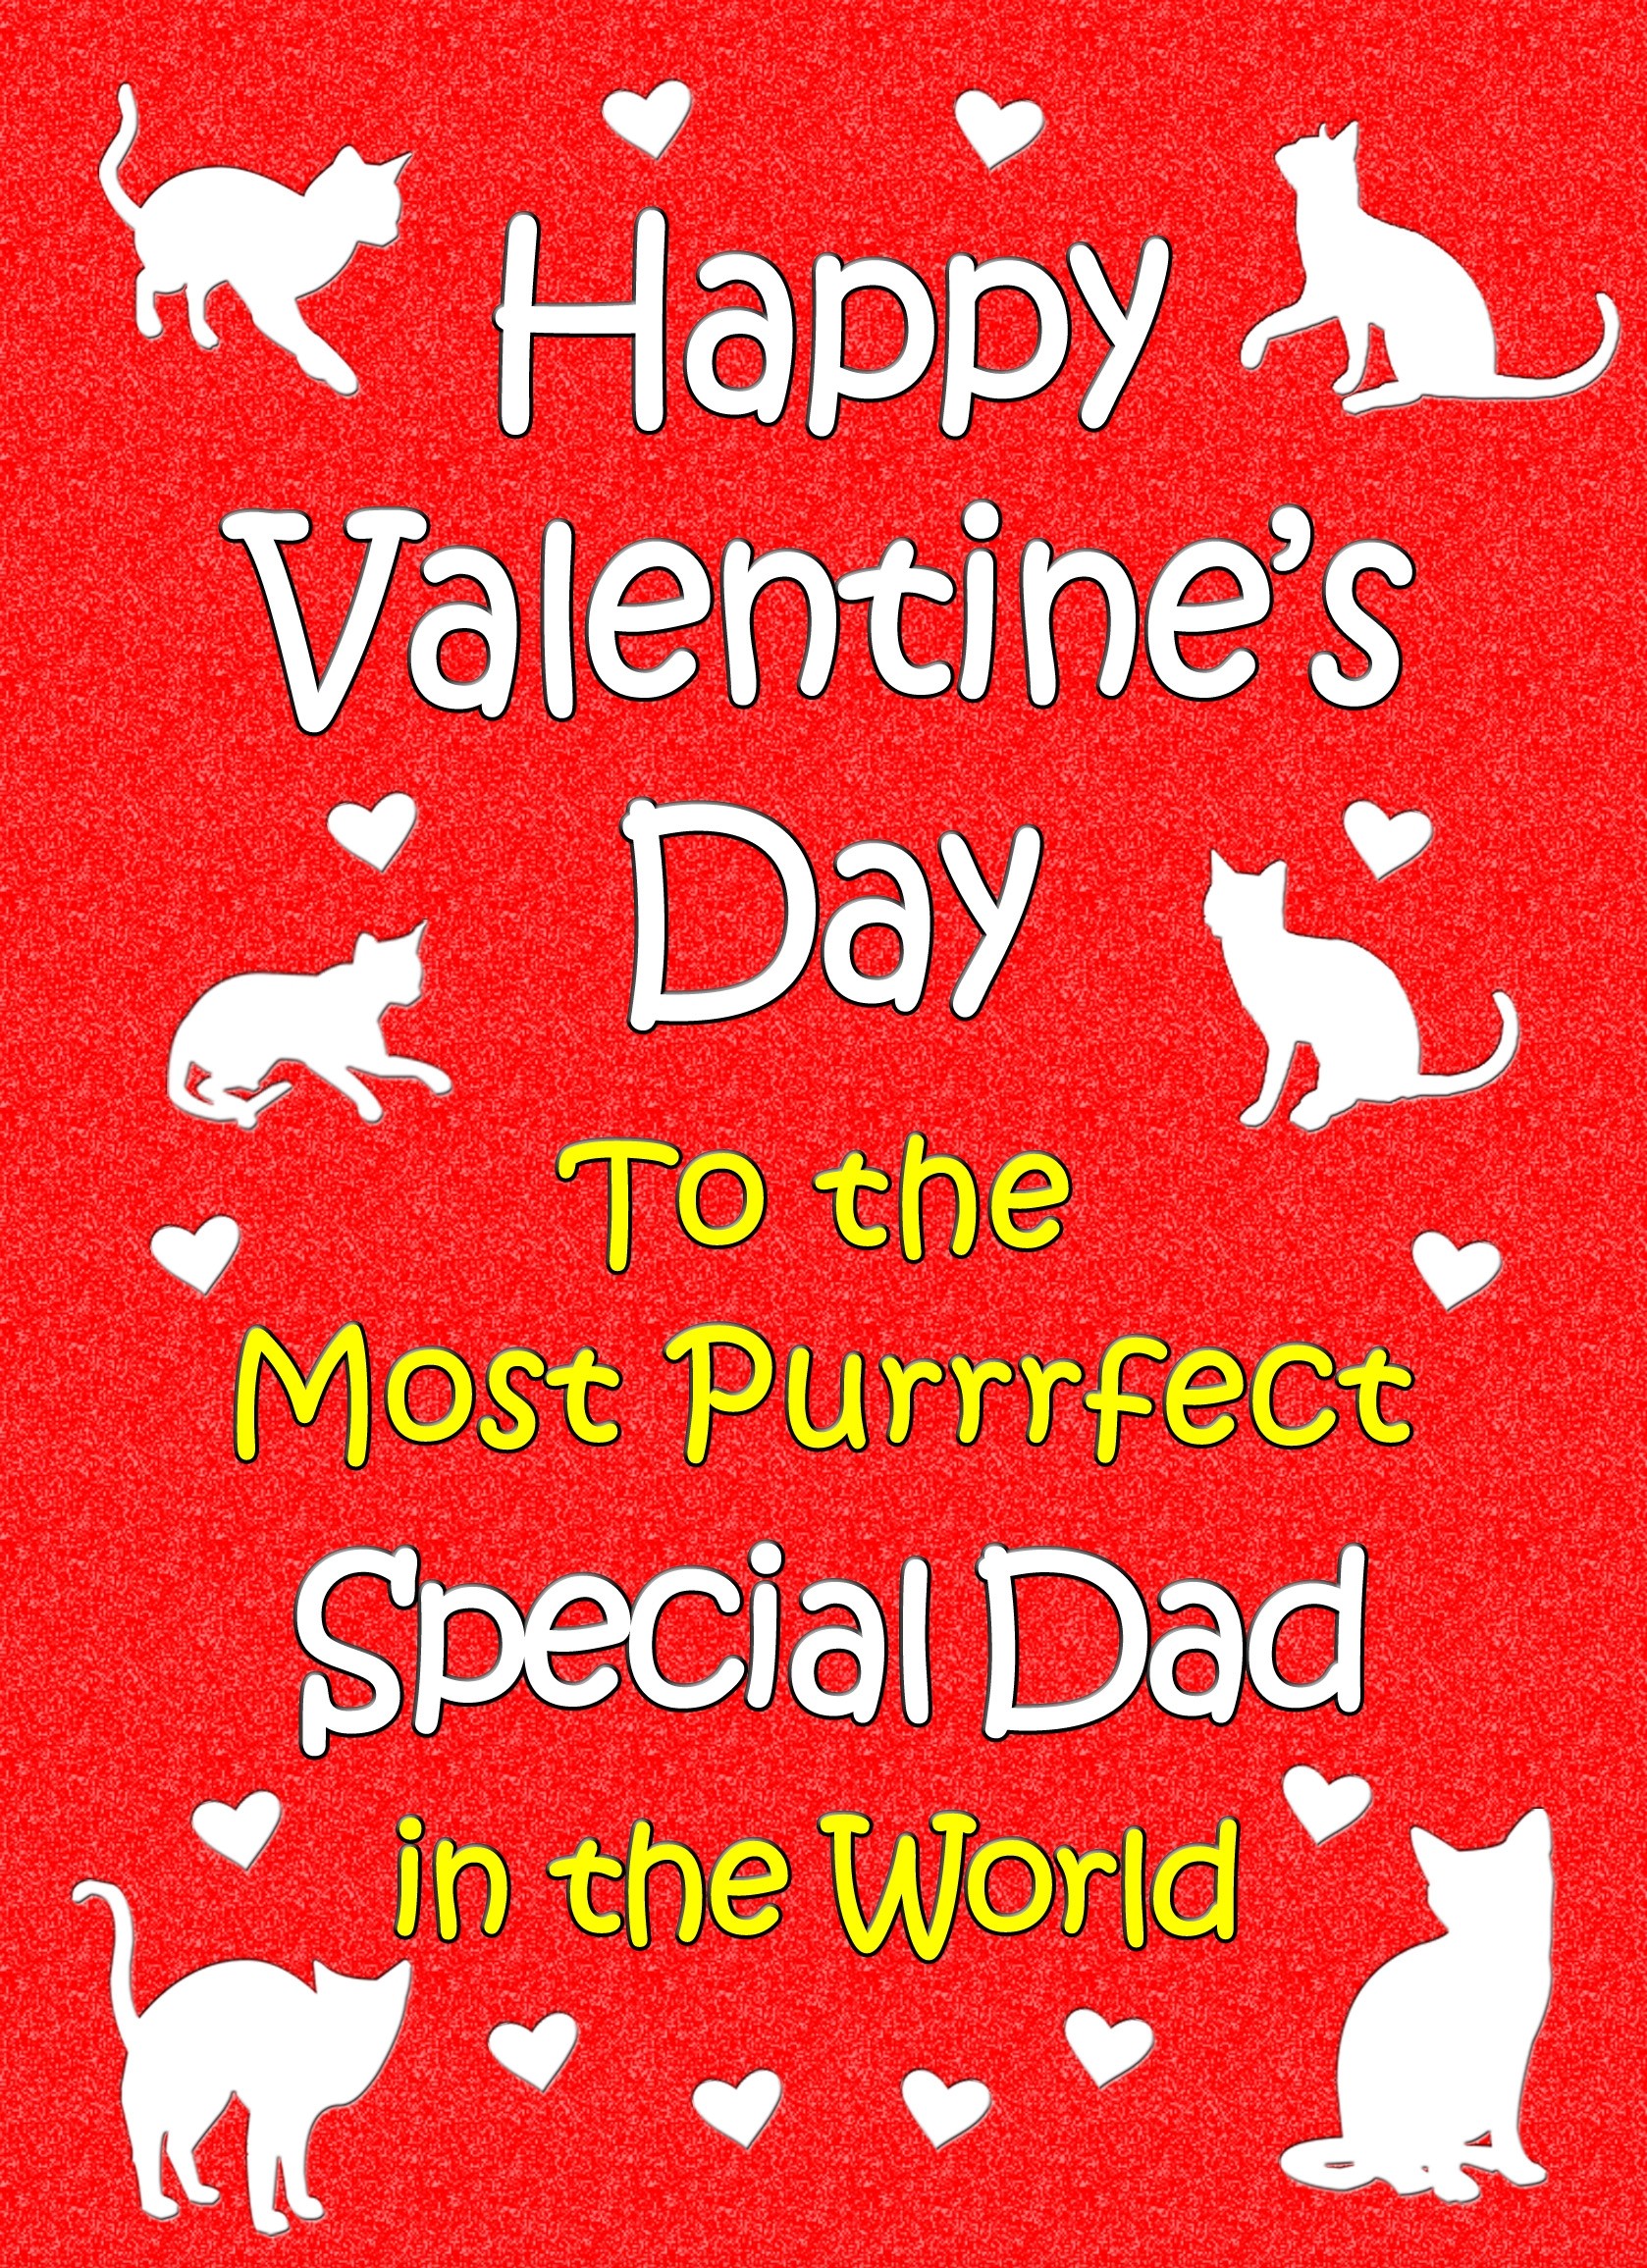 From The Cat Valentines Day Card (Special Dad)